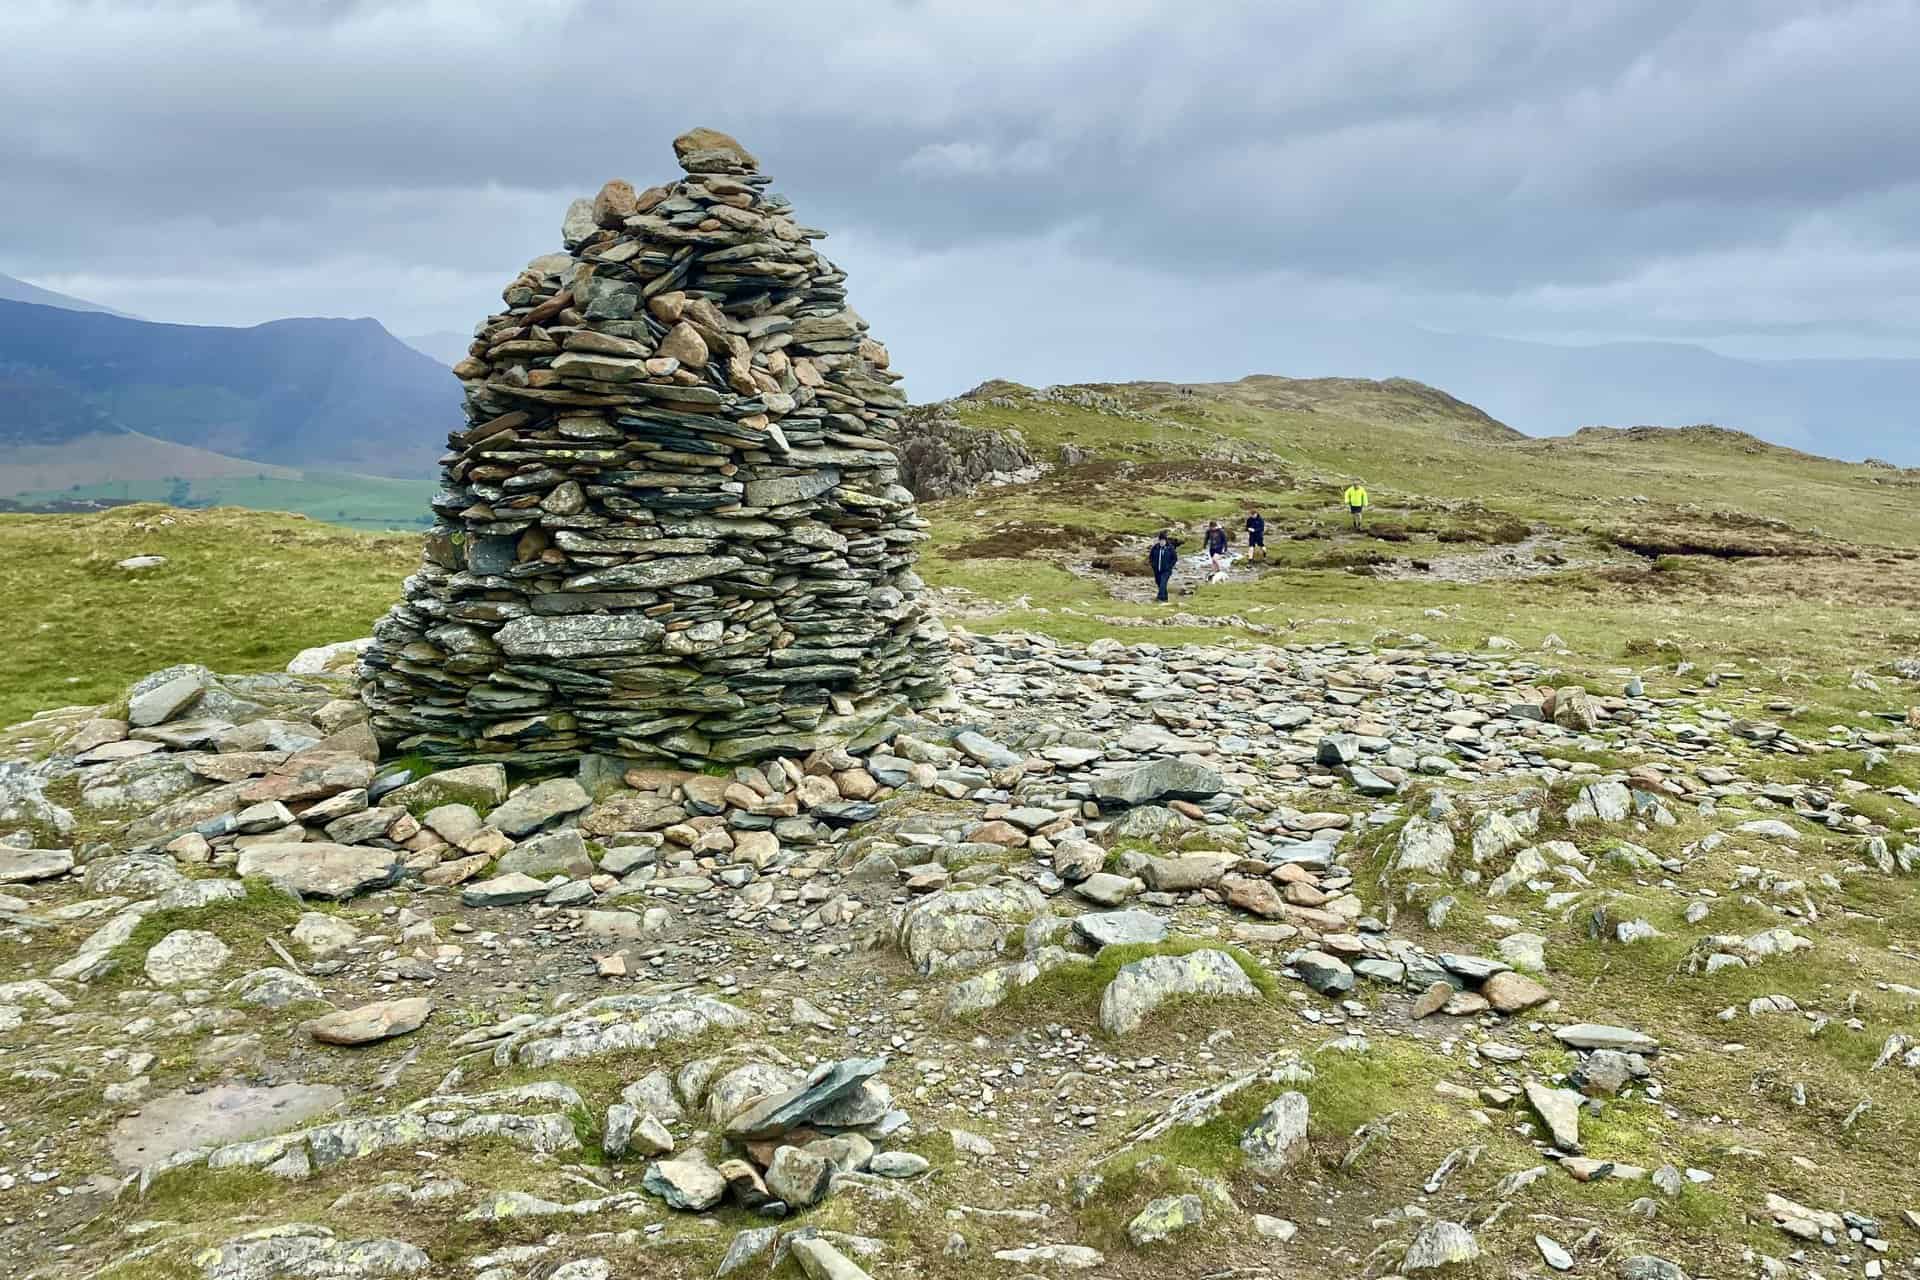 The summit cairn of High Spy, height 653 metres (2142 feet). High Spy is approximately two-thirds of the way round this Newlands Horseshoe walk.